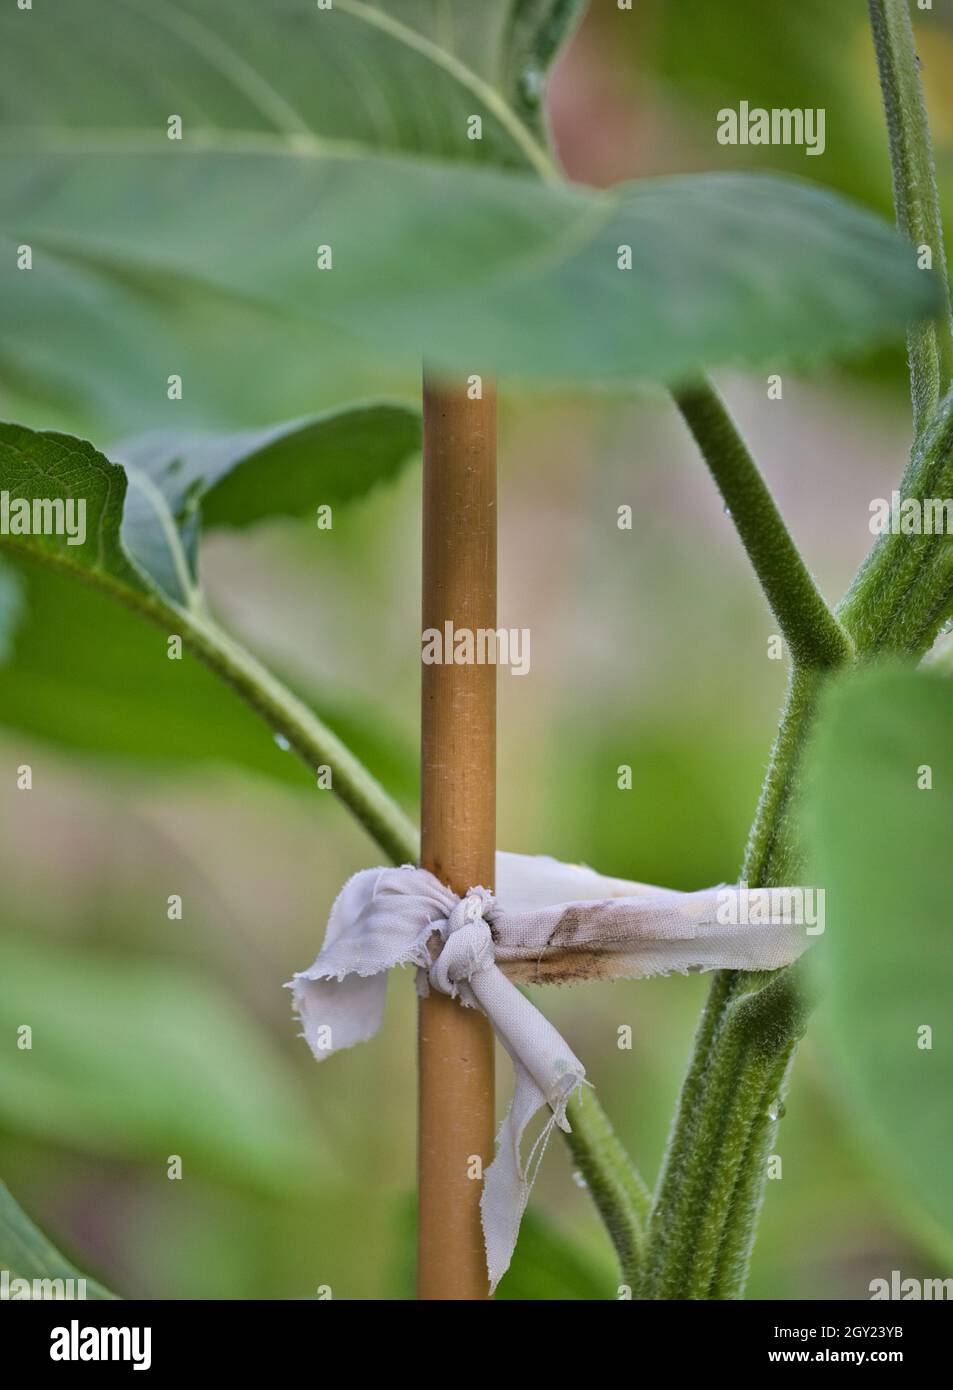 Bamboo cane tied with cloth to support sunflower plant stem (Helianthus Annuus) Stock Photo